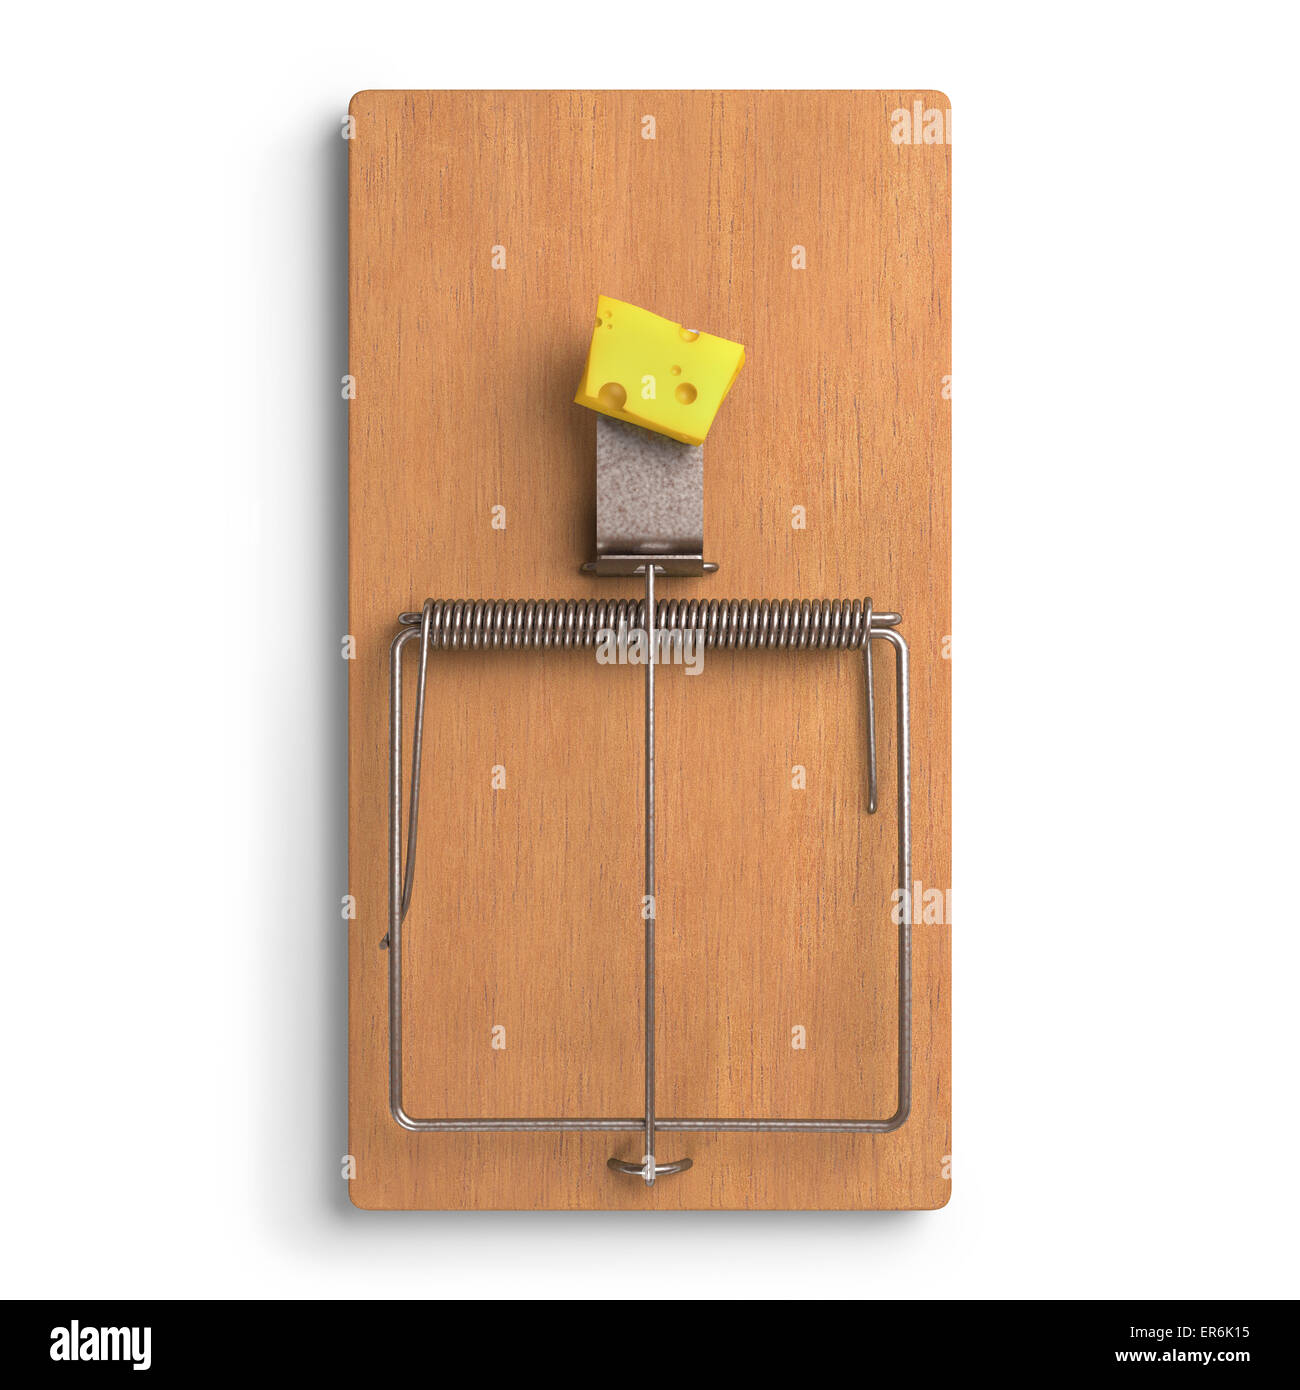 Mousetrap with cheese on white background. Clipping path included. Stock Photo